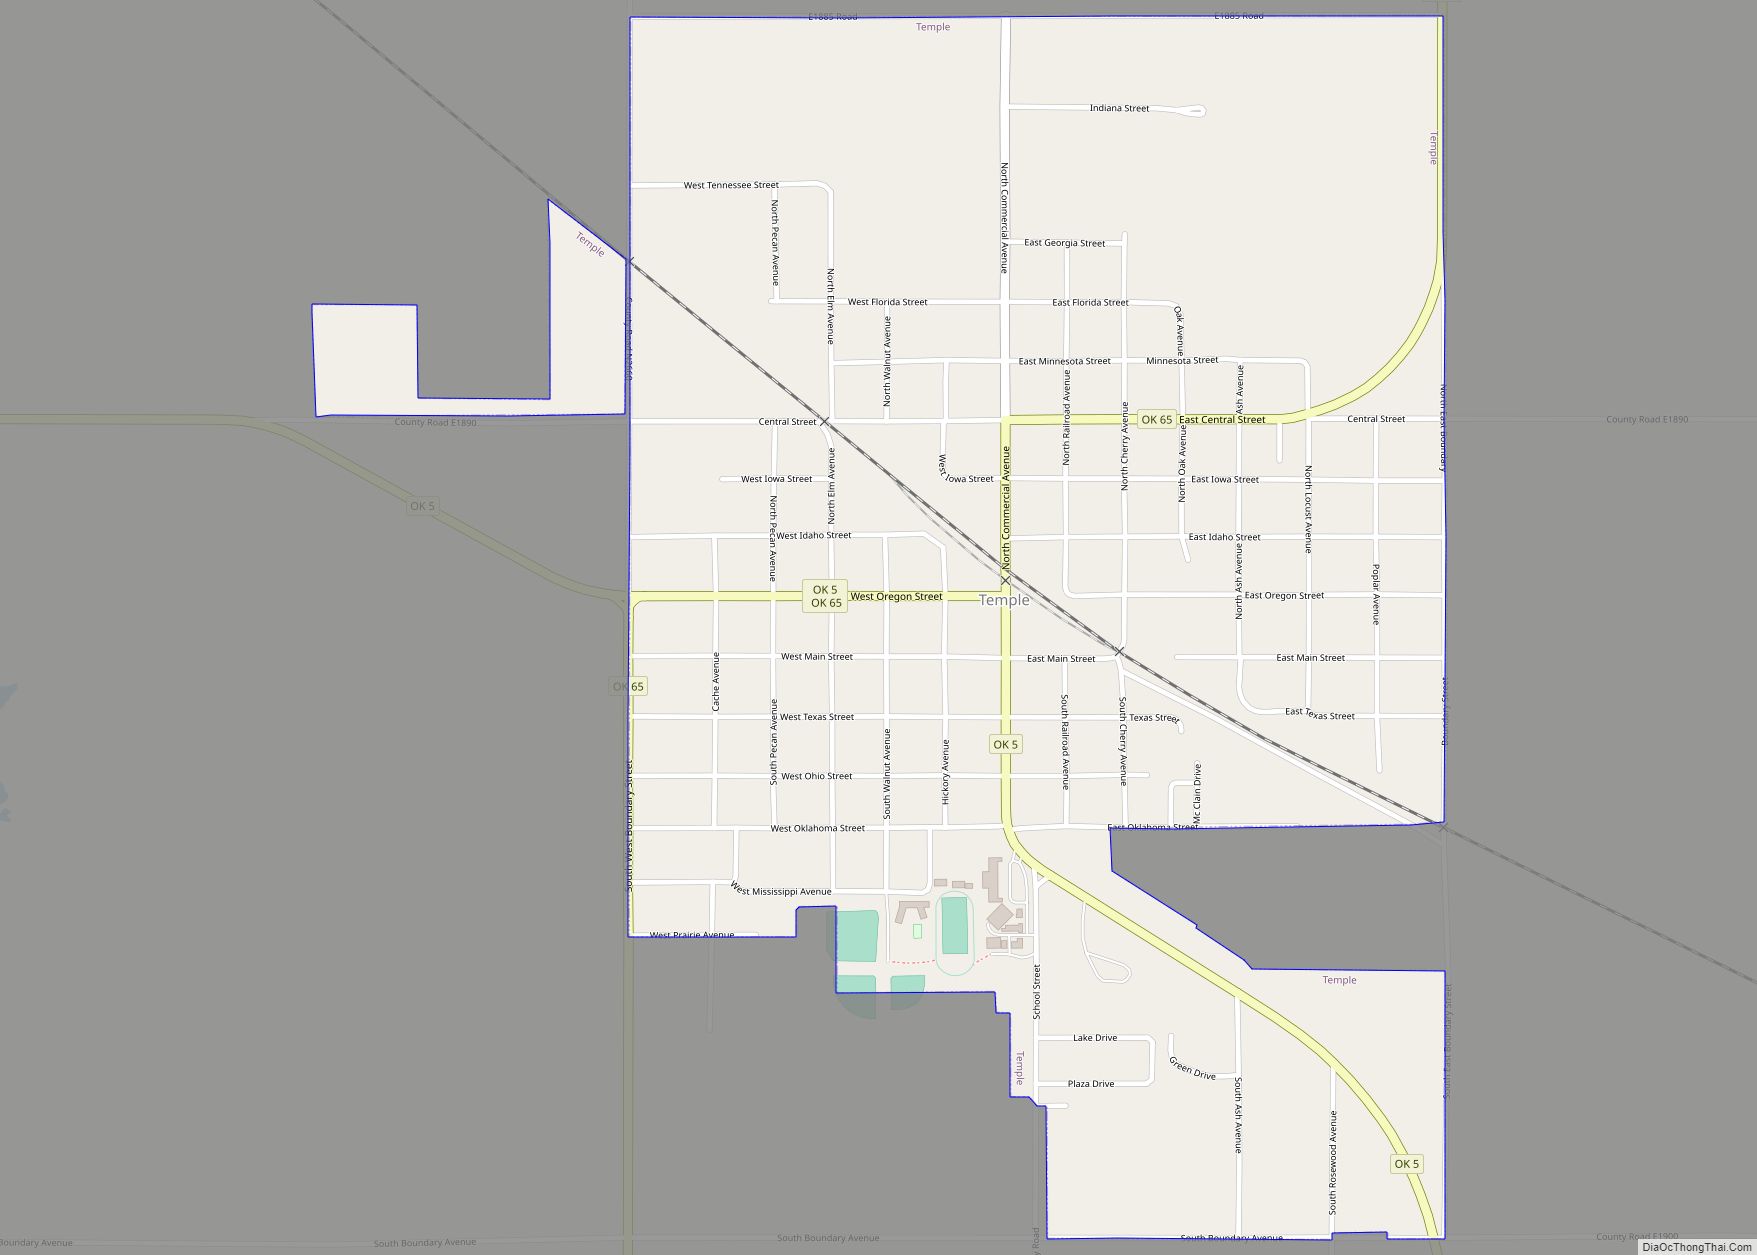 Map of Temple town, Oklahoma